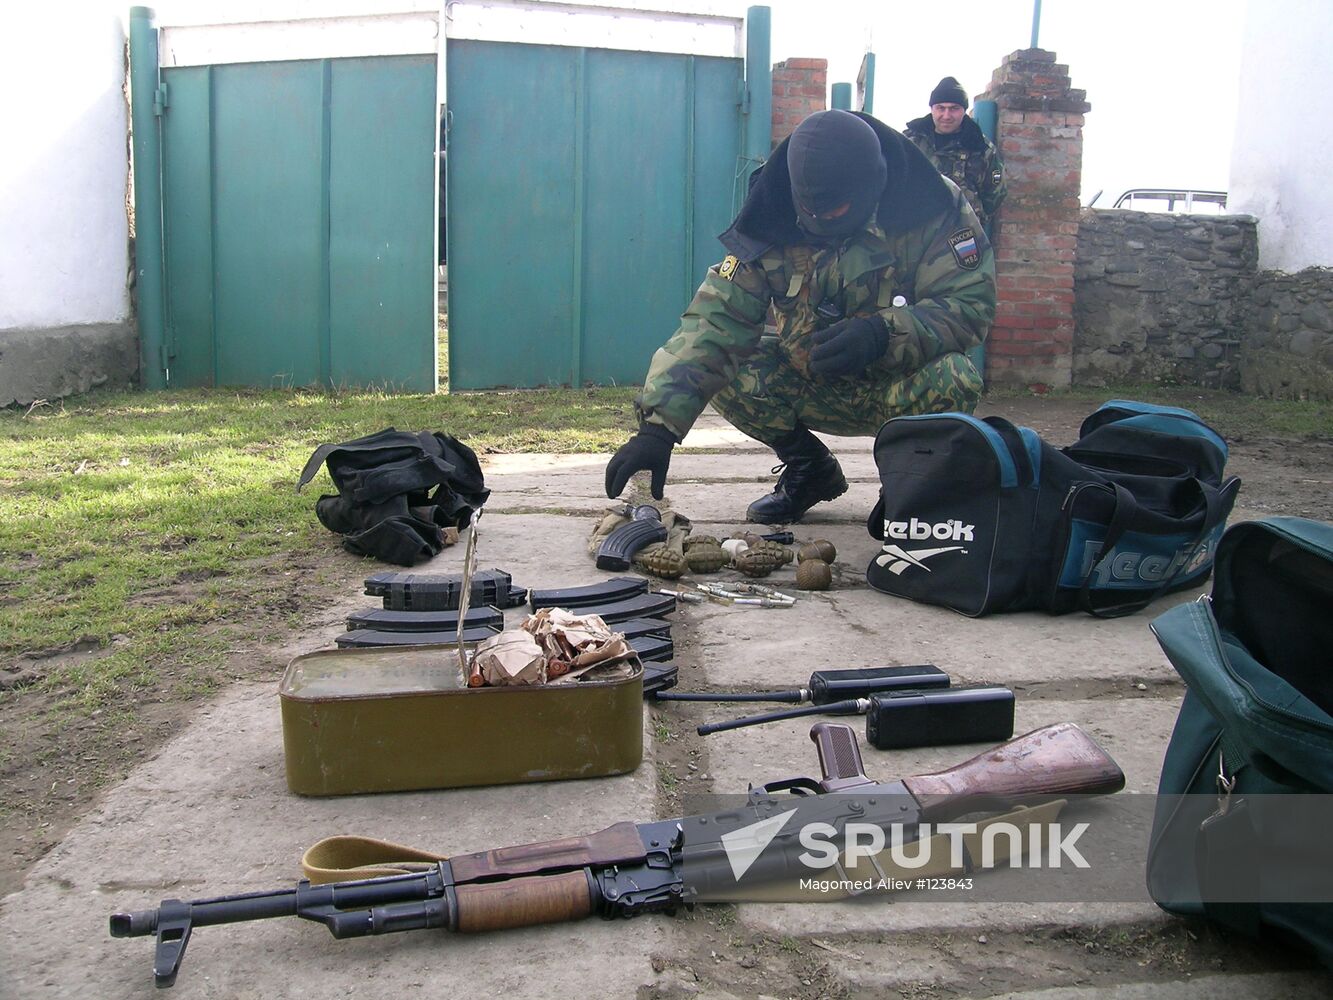 ARMS CACHET FOUND IN DAGESTAN